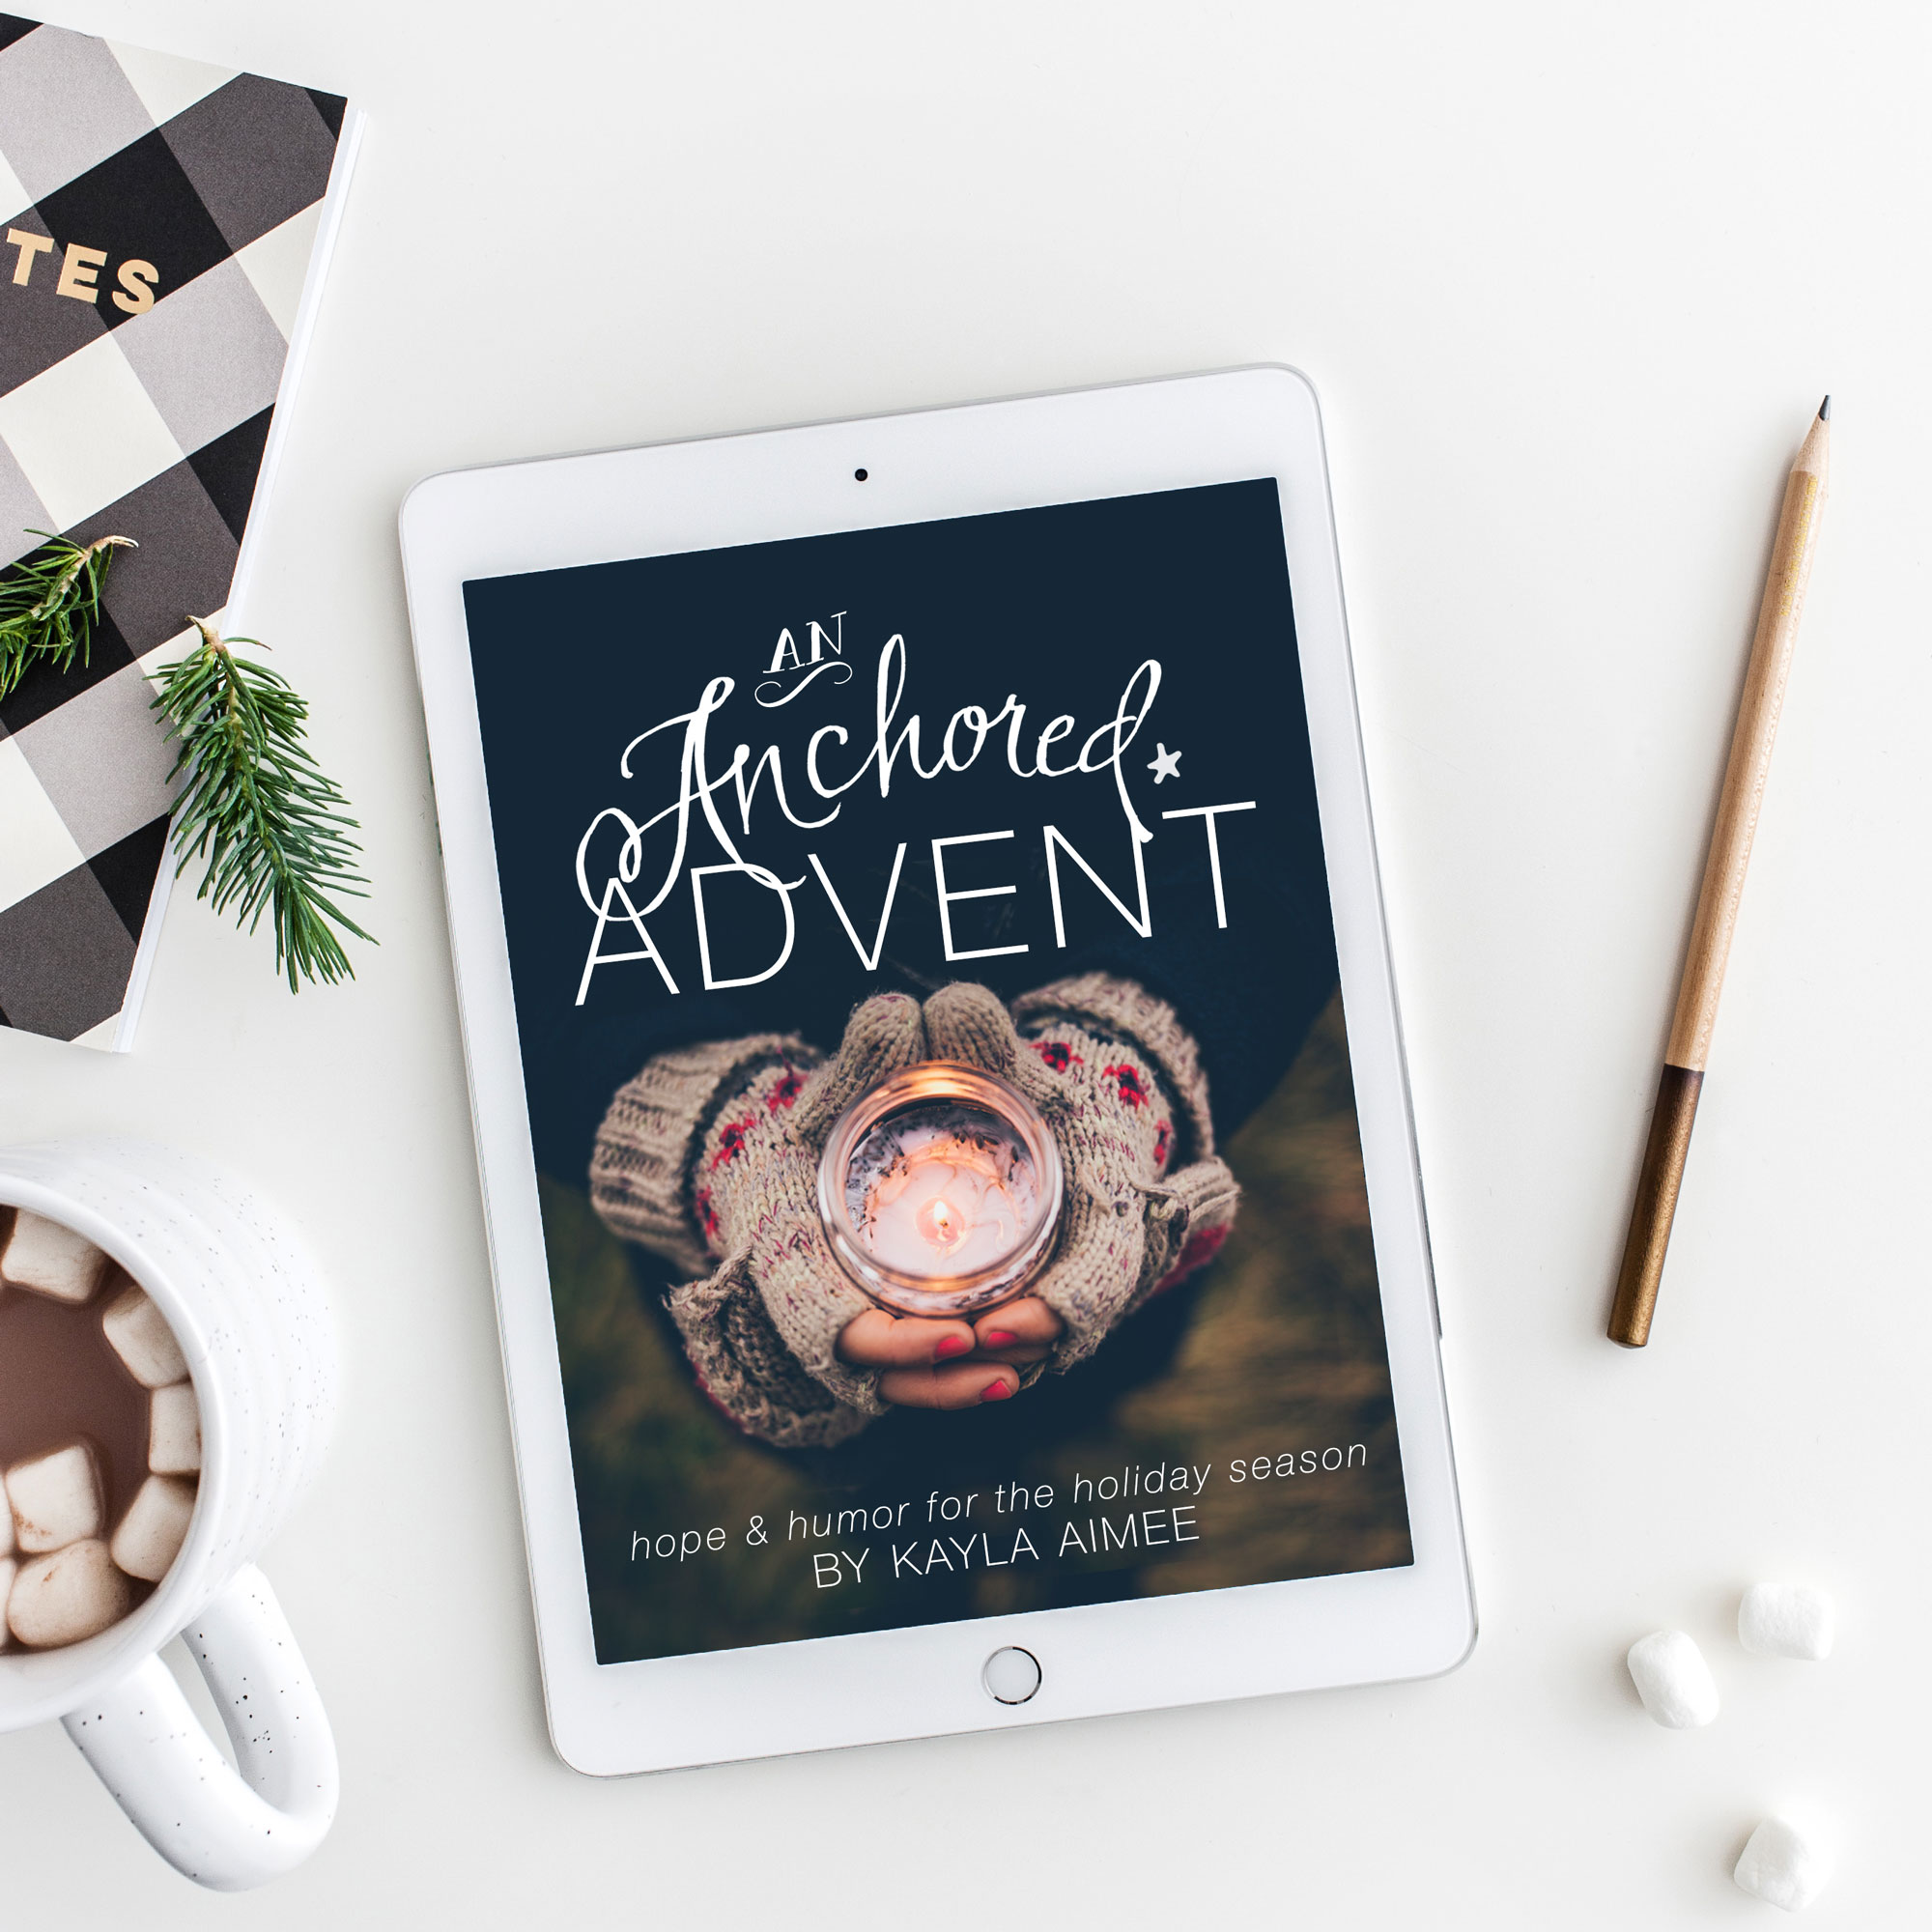 Free Advent Series with Christmas Printable Pack by Kayla Aimee